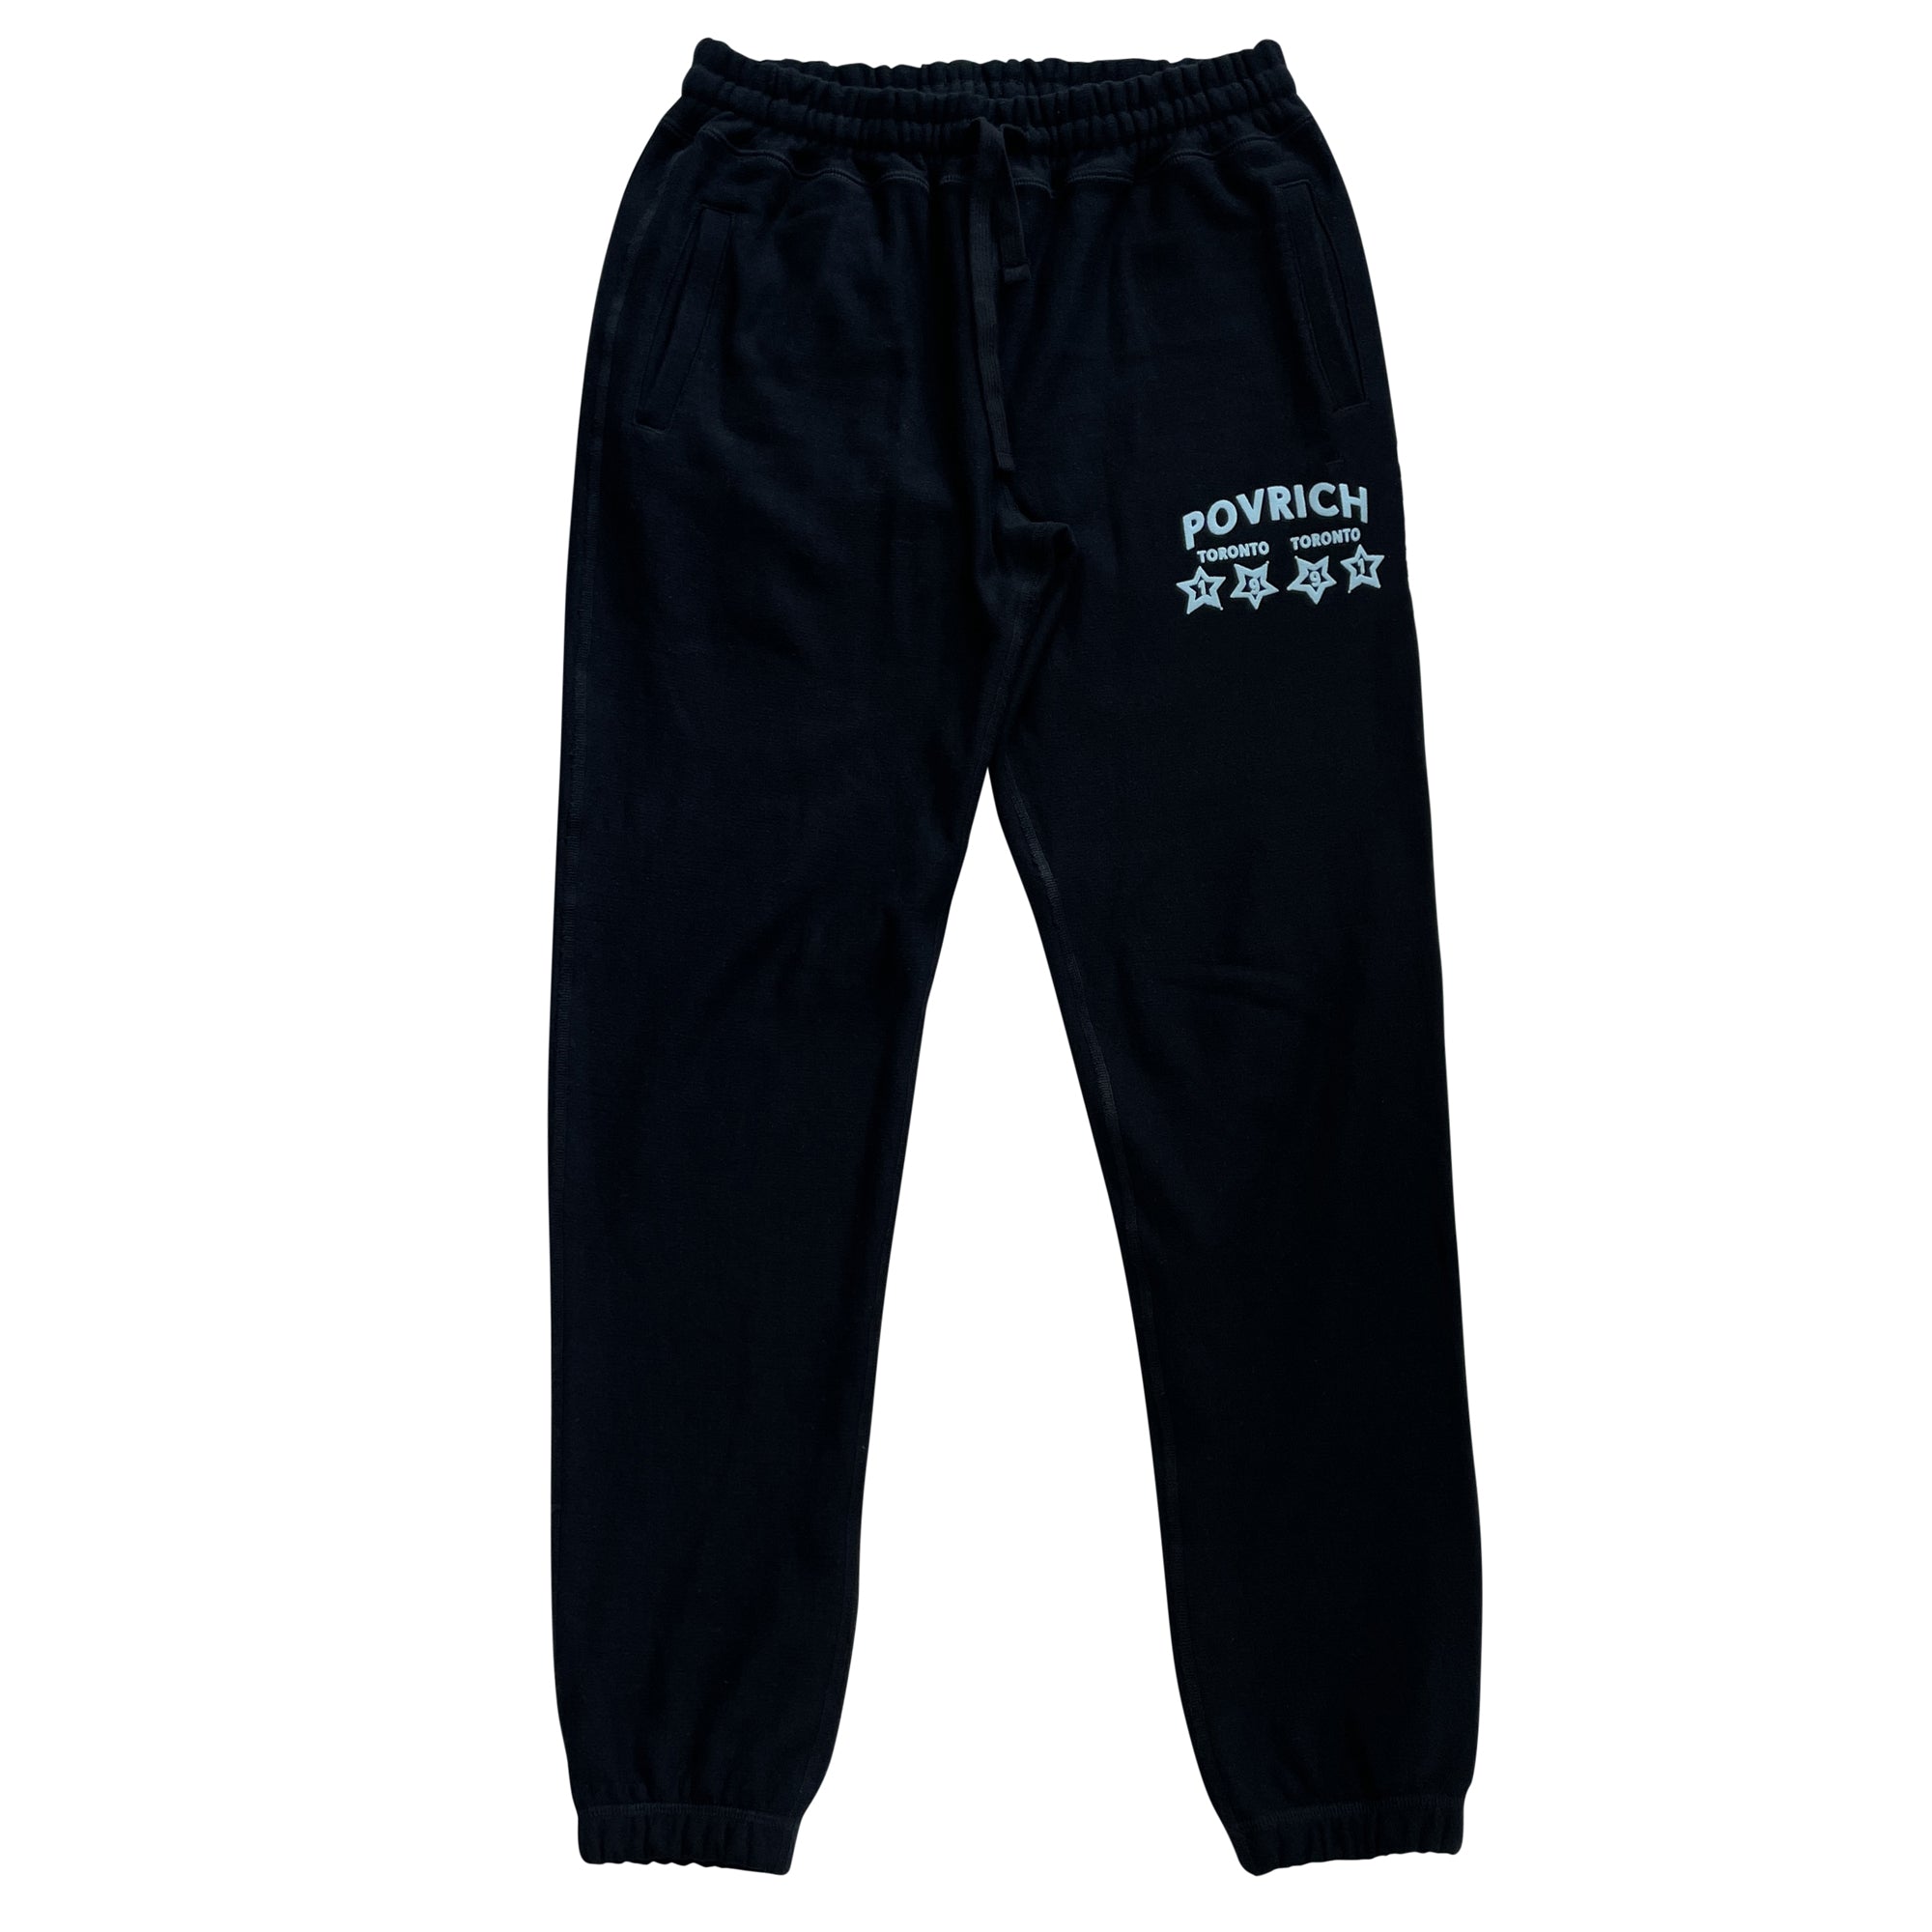 400GSM Jogger pants with ribbed cuffs and waistband. Comfortable and stylish streetwear for men and women.